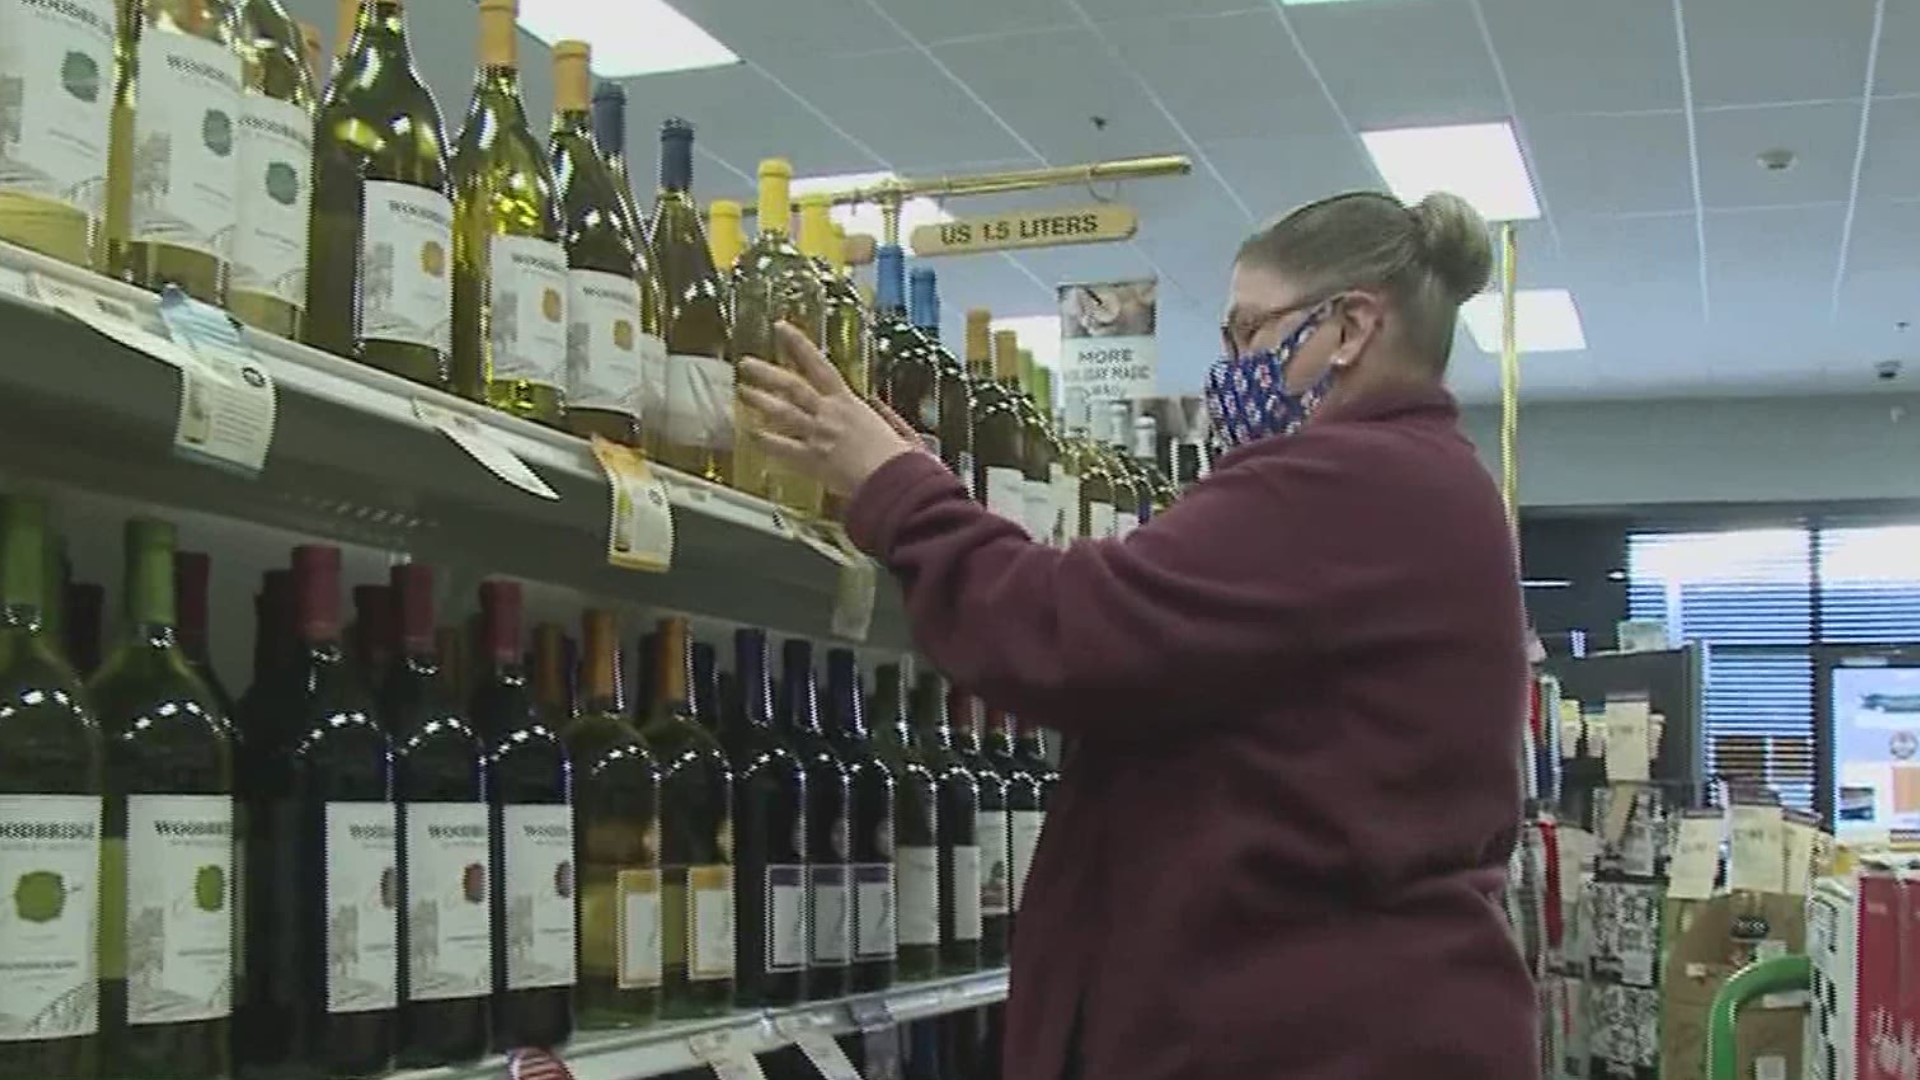 The COVID-19 pandemic is changing how people will celebrate the start of a new year. As Newswatch 16's Carolyn Blackburne shows us, liquor and beer stores are busy.